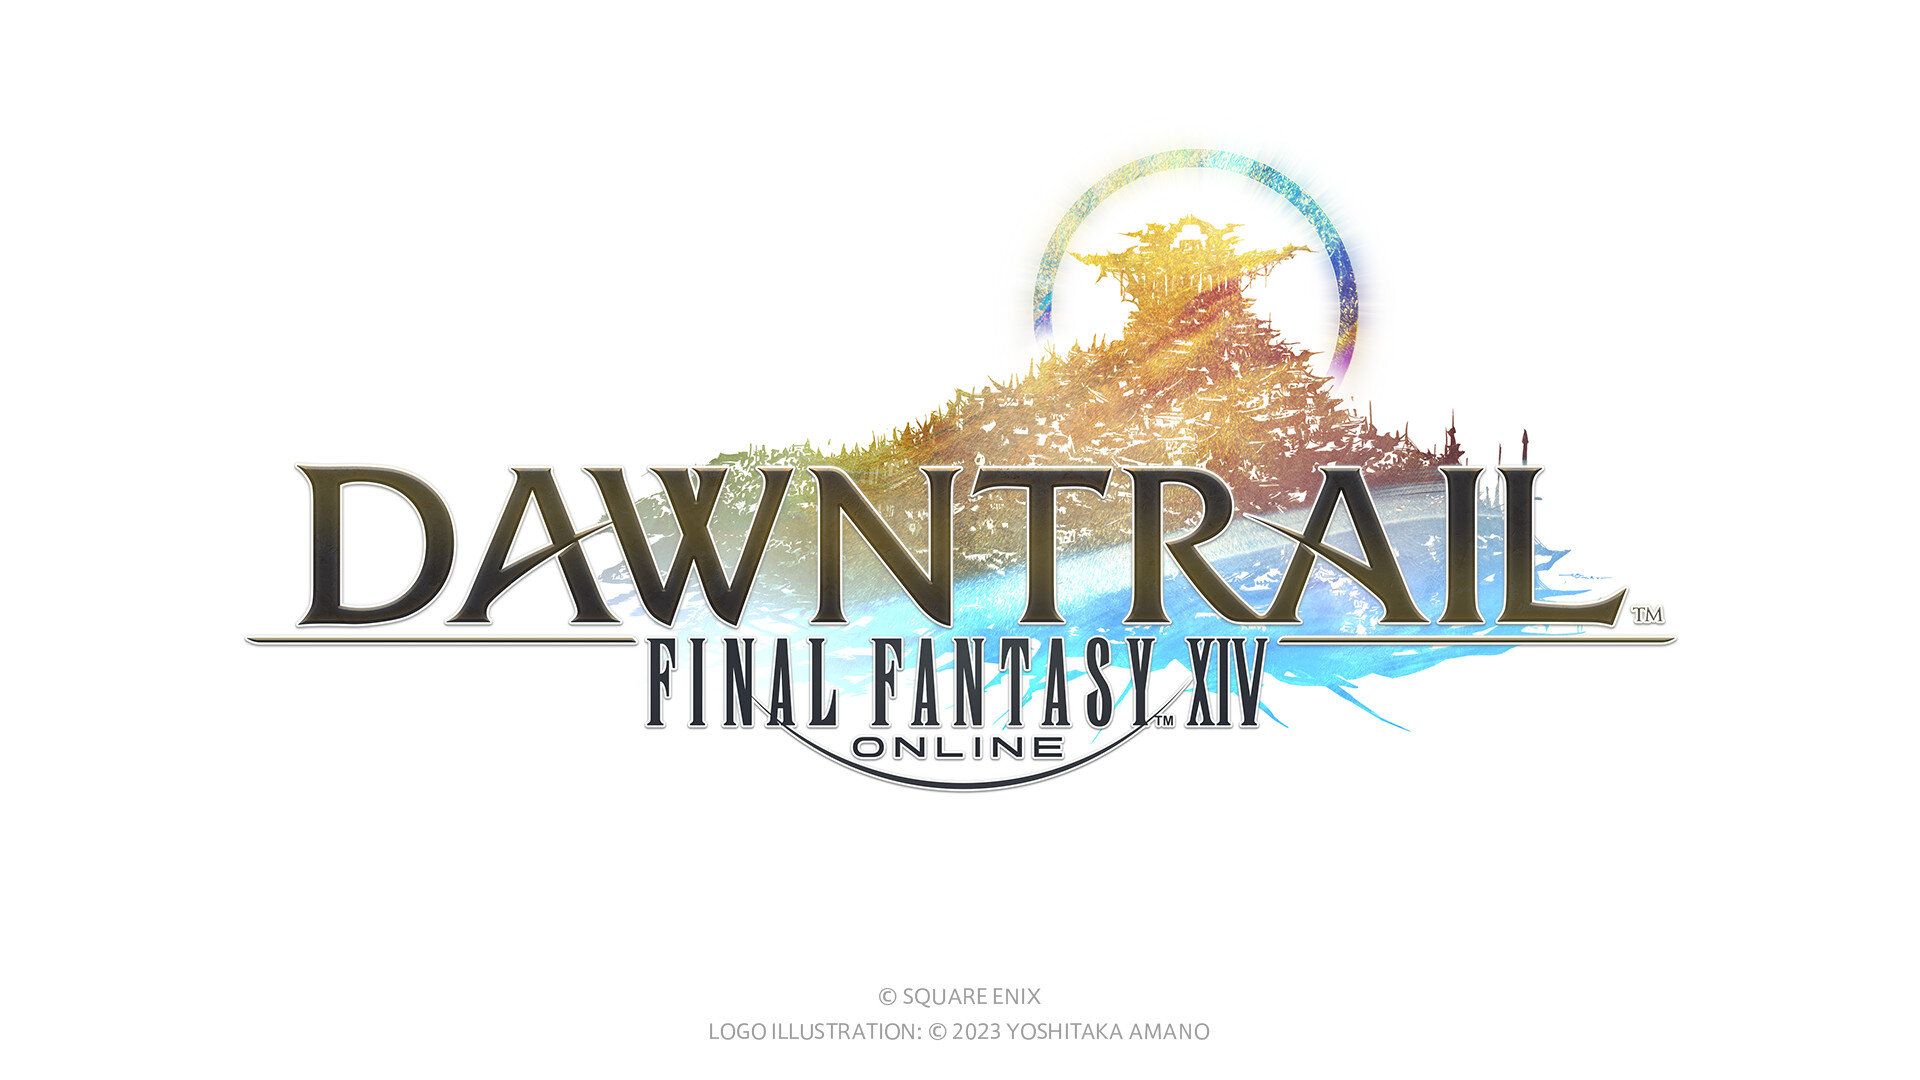 Final Fantasy XIV goes on a New World adventure with Dawntrail